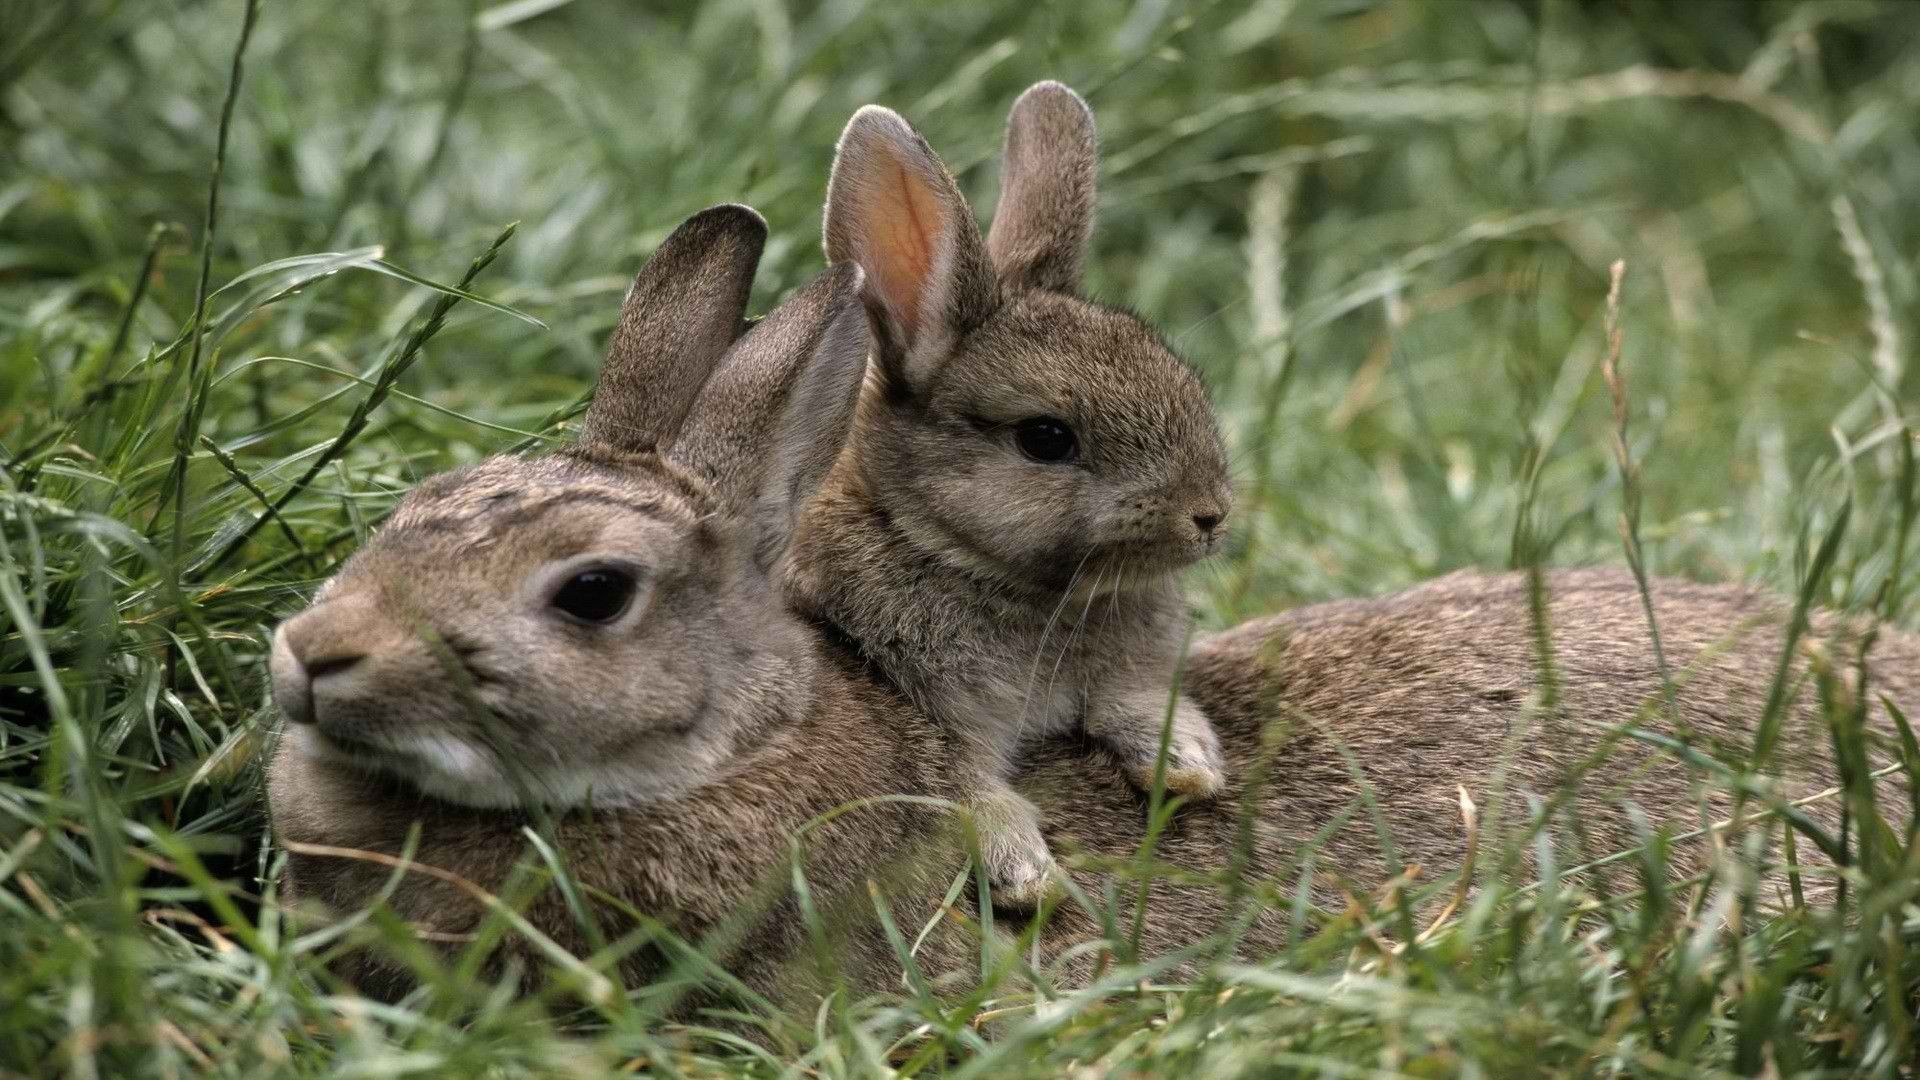 Download Wallpaper, Download animals mother rabbits european baby animals young rabbits 1920x1080 wallpaper Animals HD Wallpaper, Hi Res Animals Wallpaper, High Definition Wallpaper